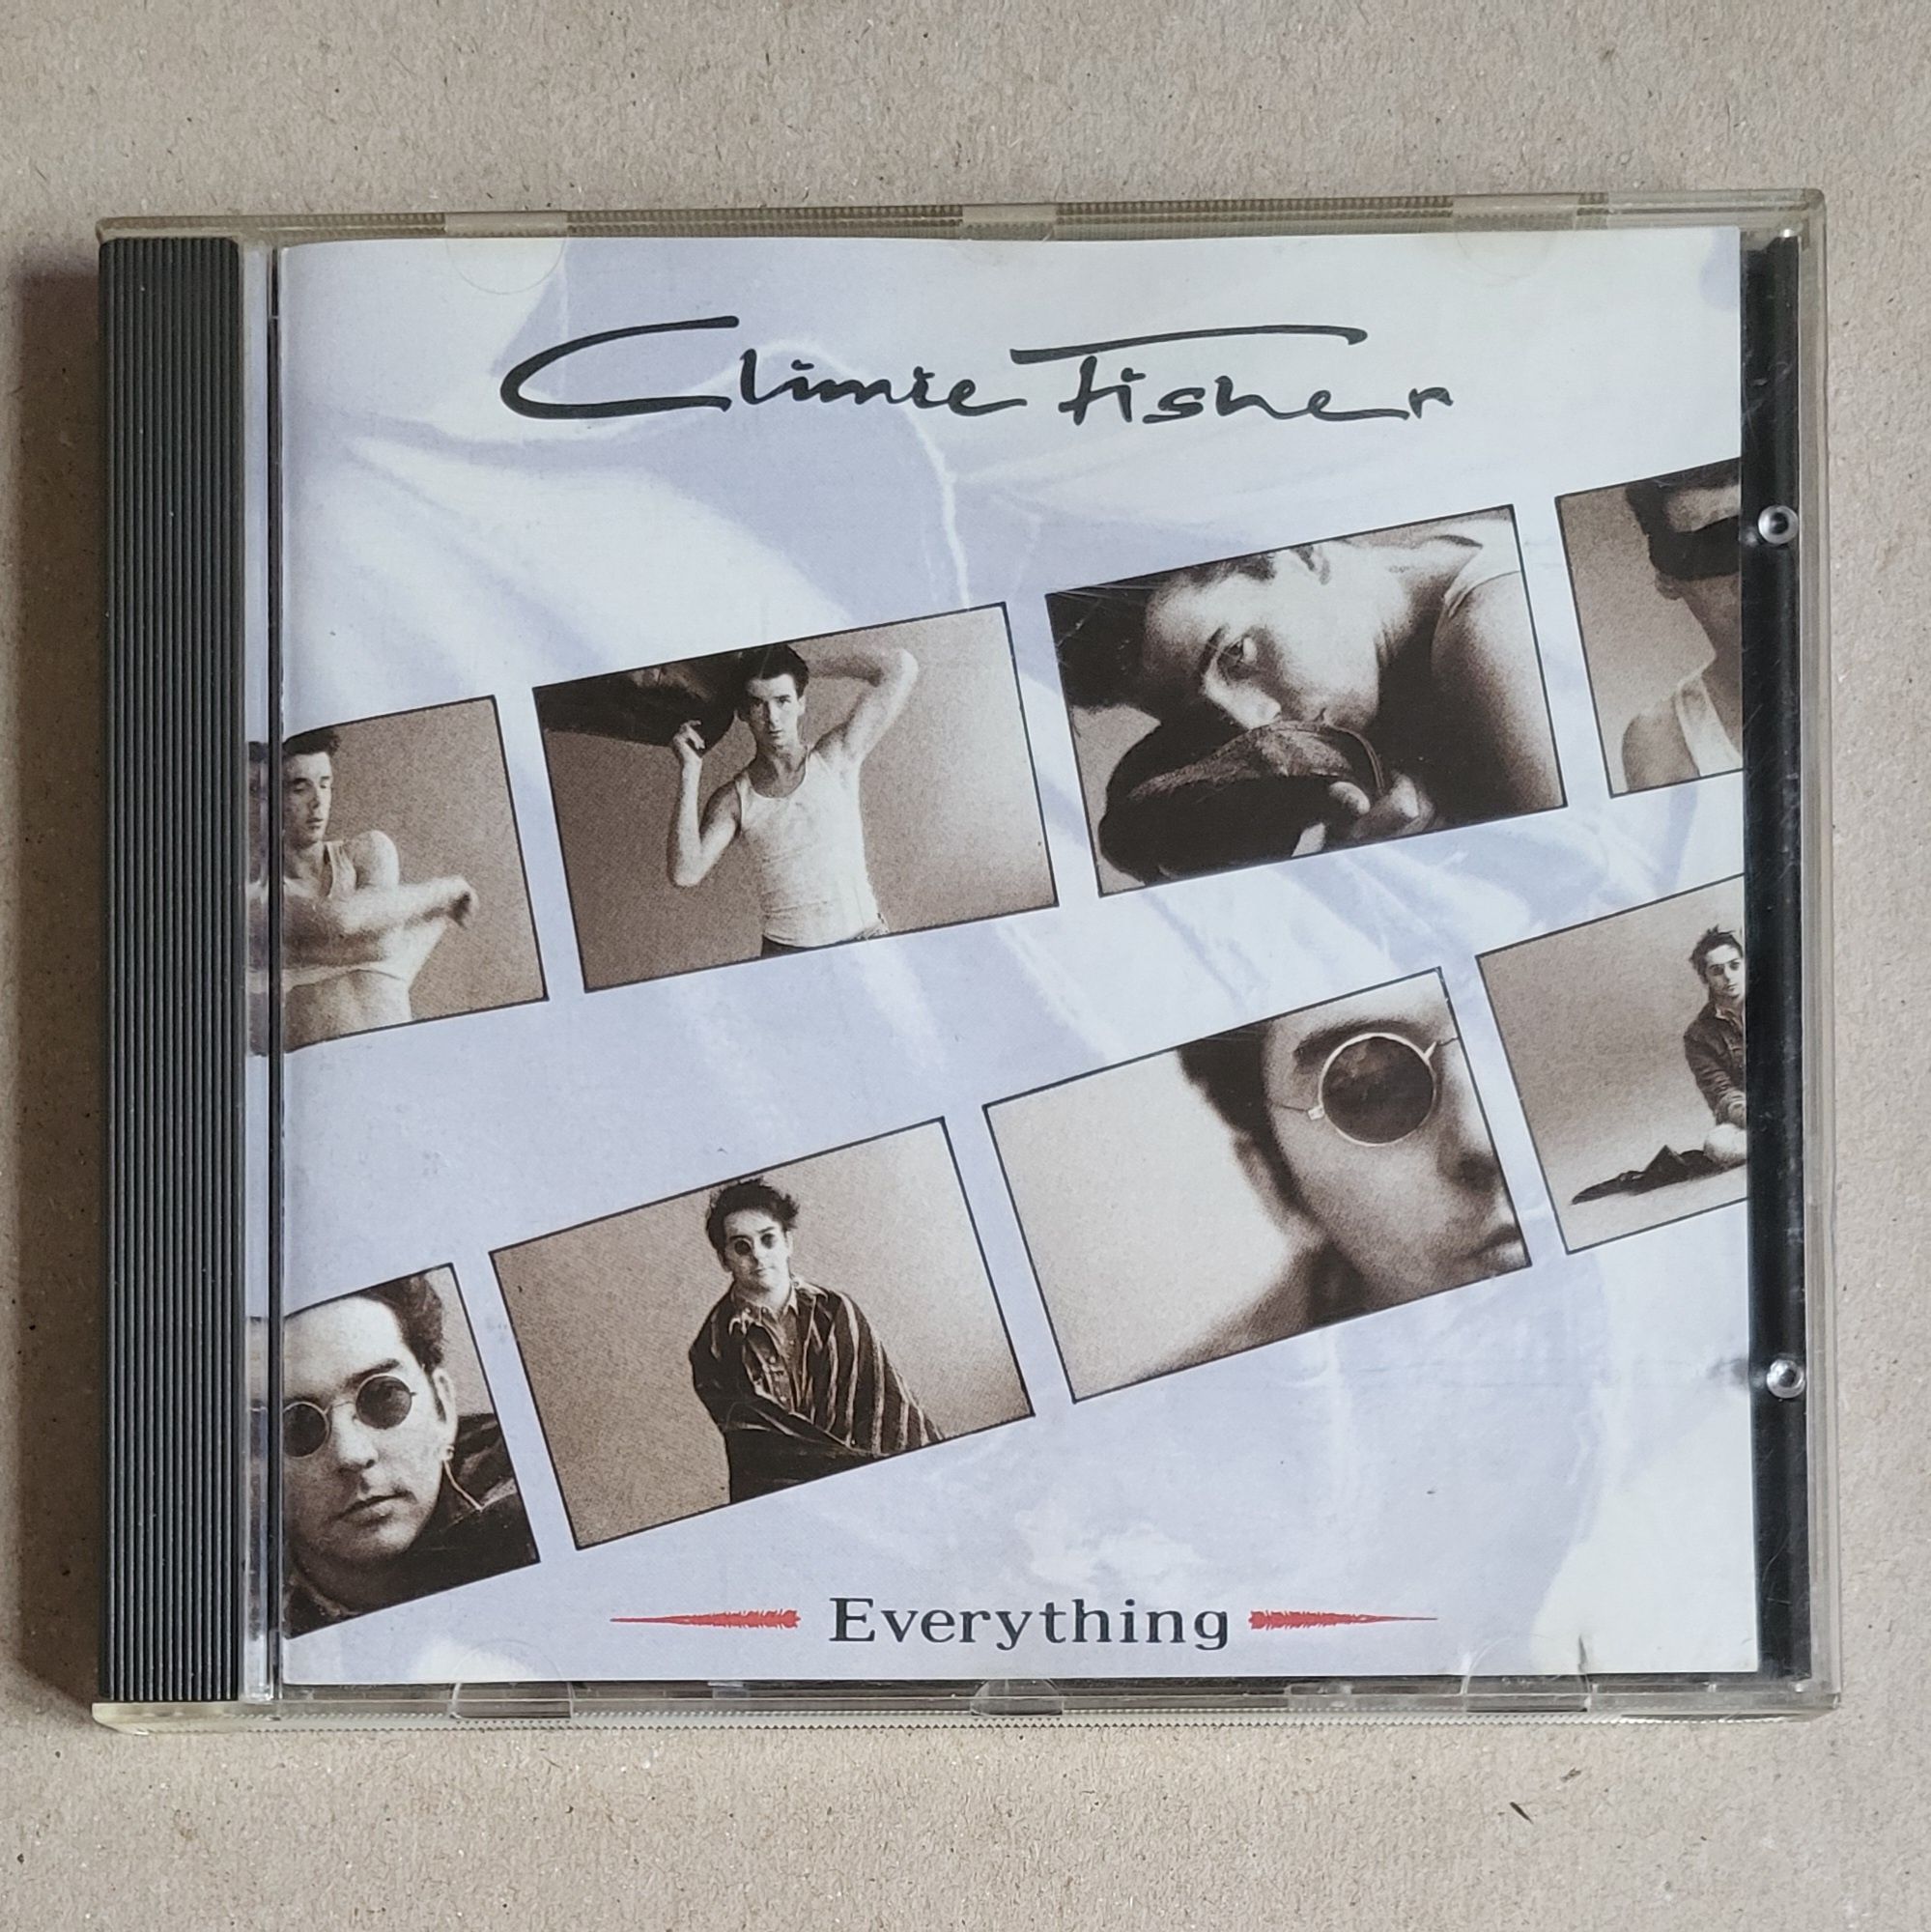 Climie Fisher - Everything (1987) CD